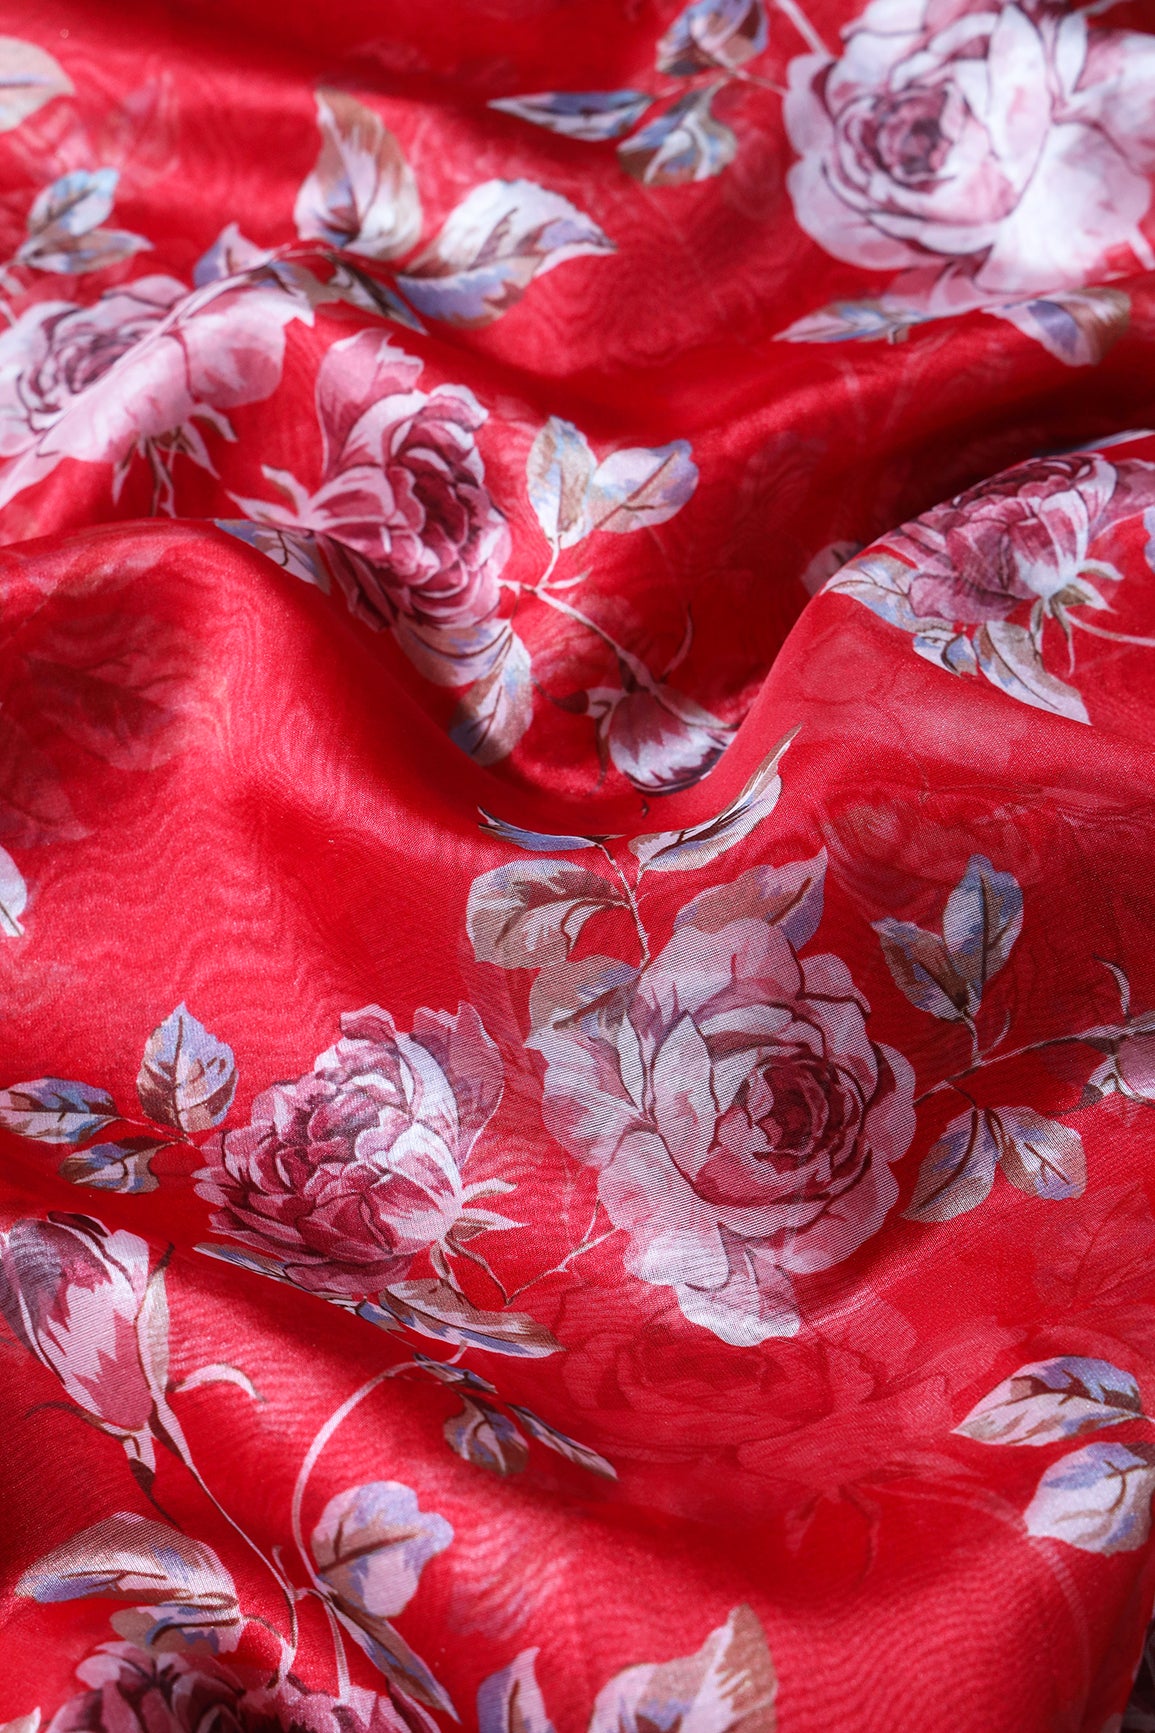 Multi Color Floral Digital Print On Red Organza Fabric